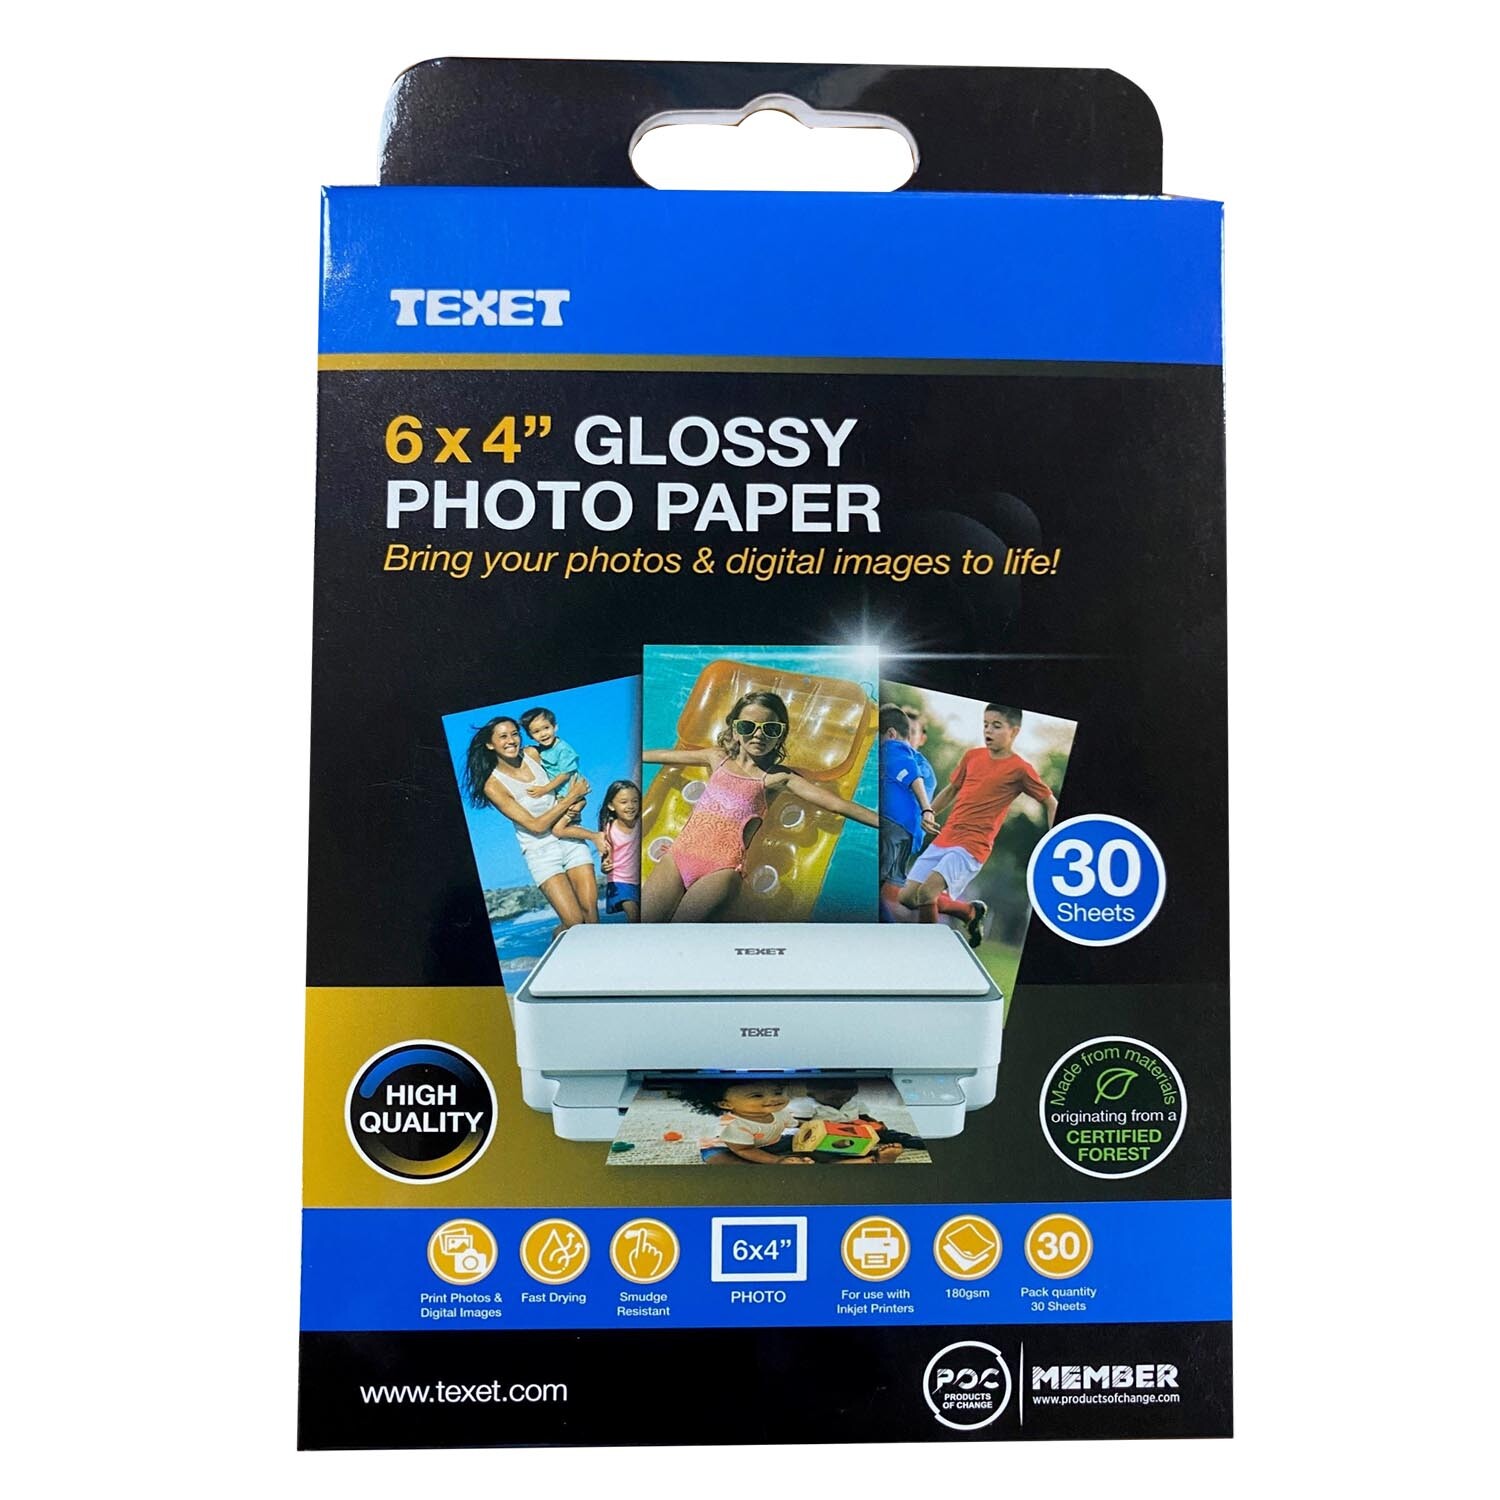 Pack of 30 Texet Glossy Photo Paper - 6x4" Image